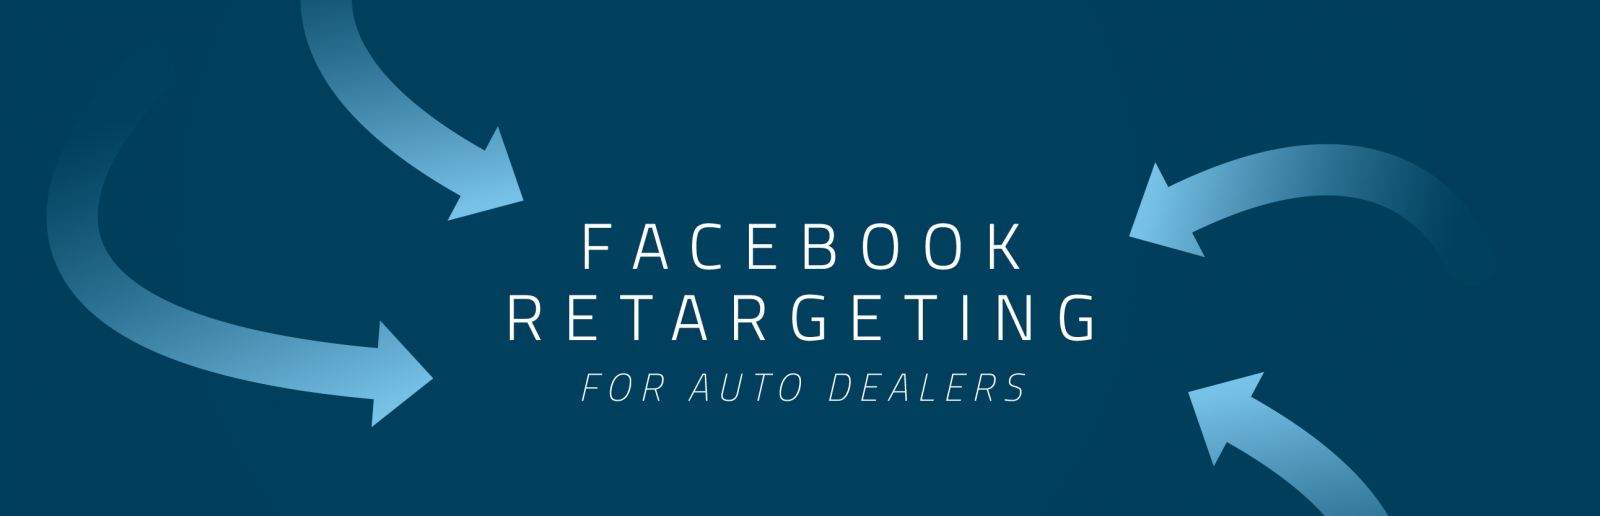 Why Dealers Need Facebook Retargeting (and 4 Ways to Use It)